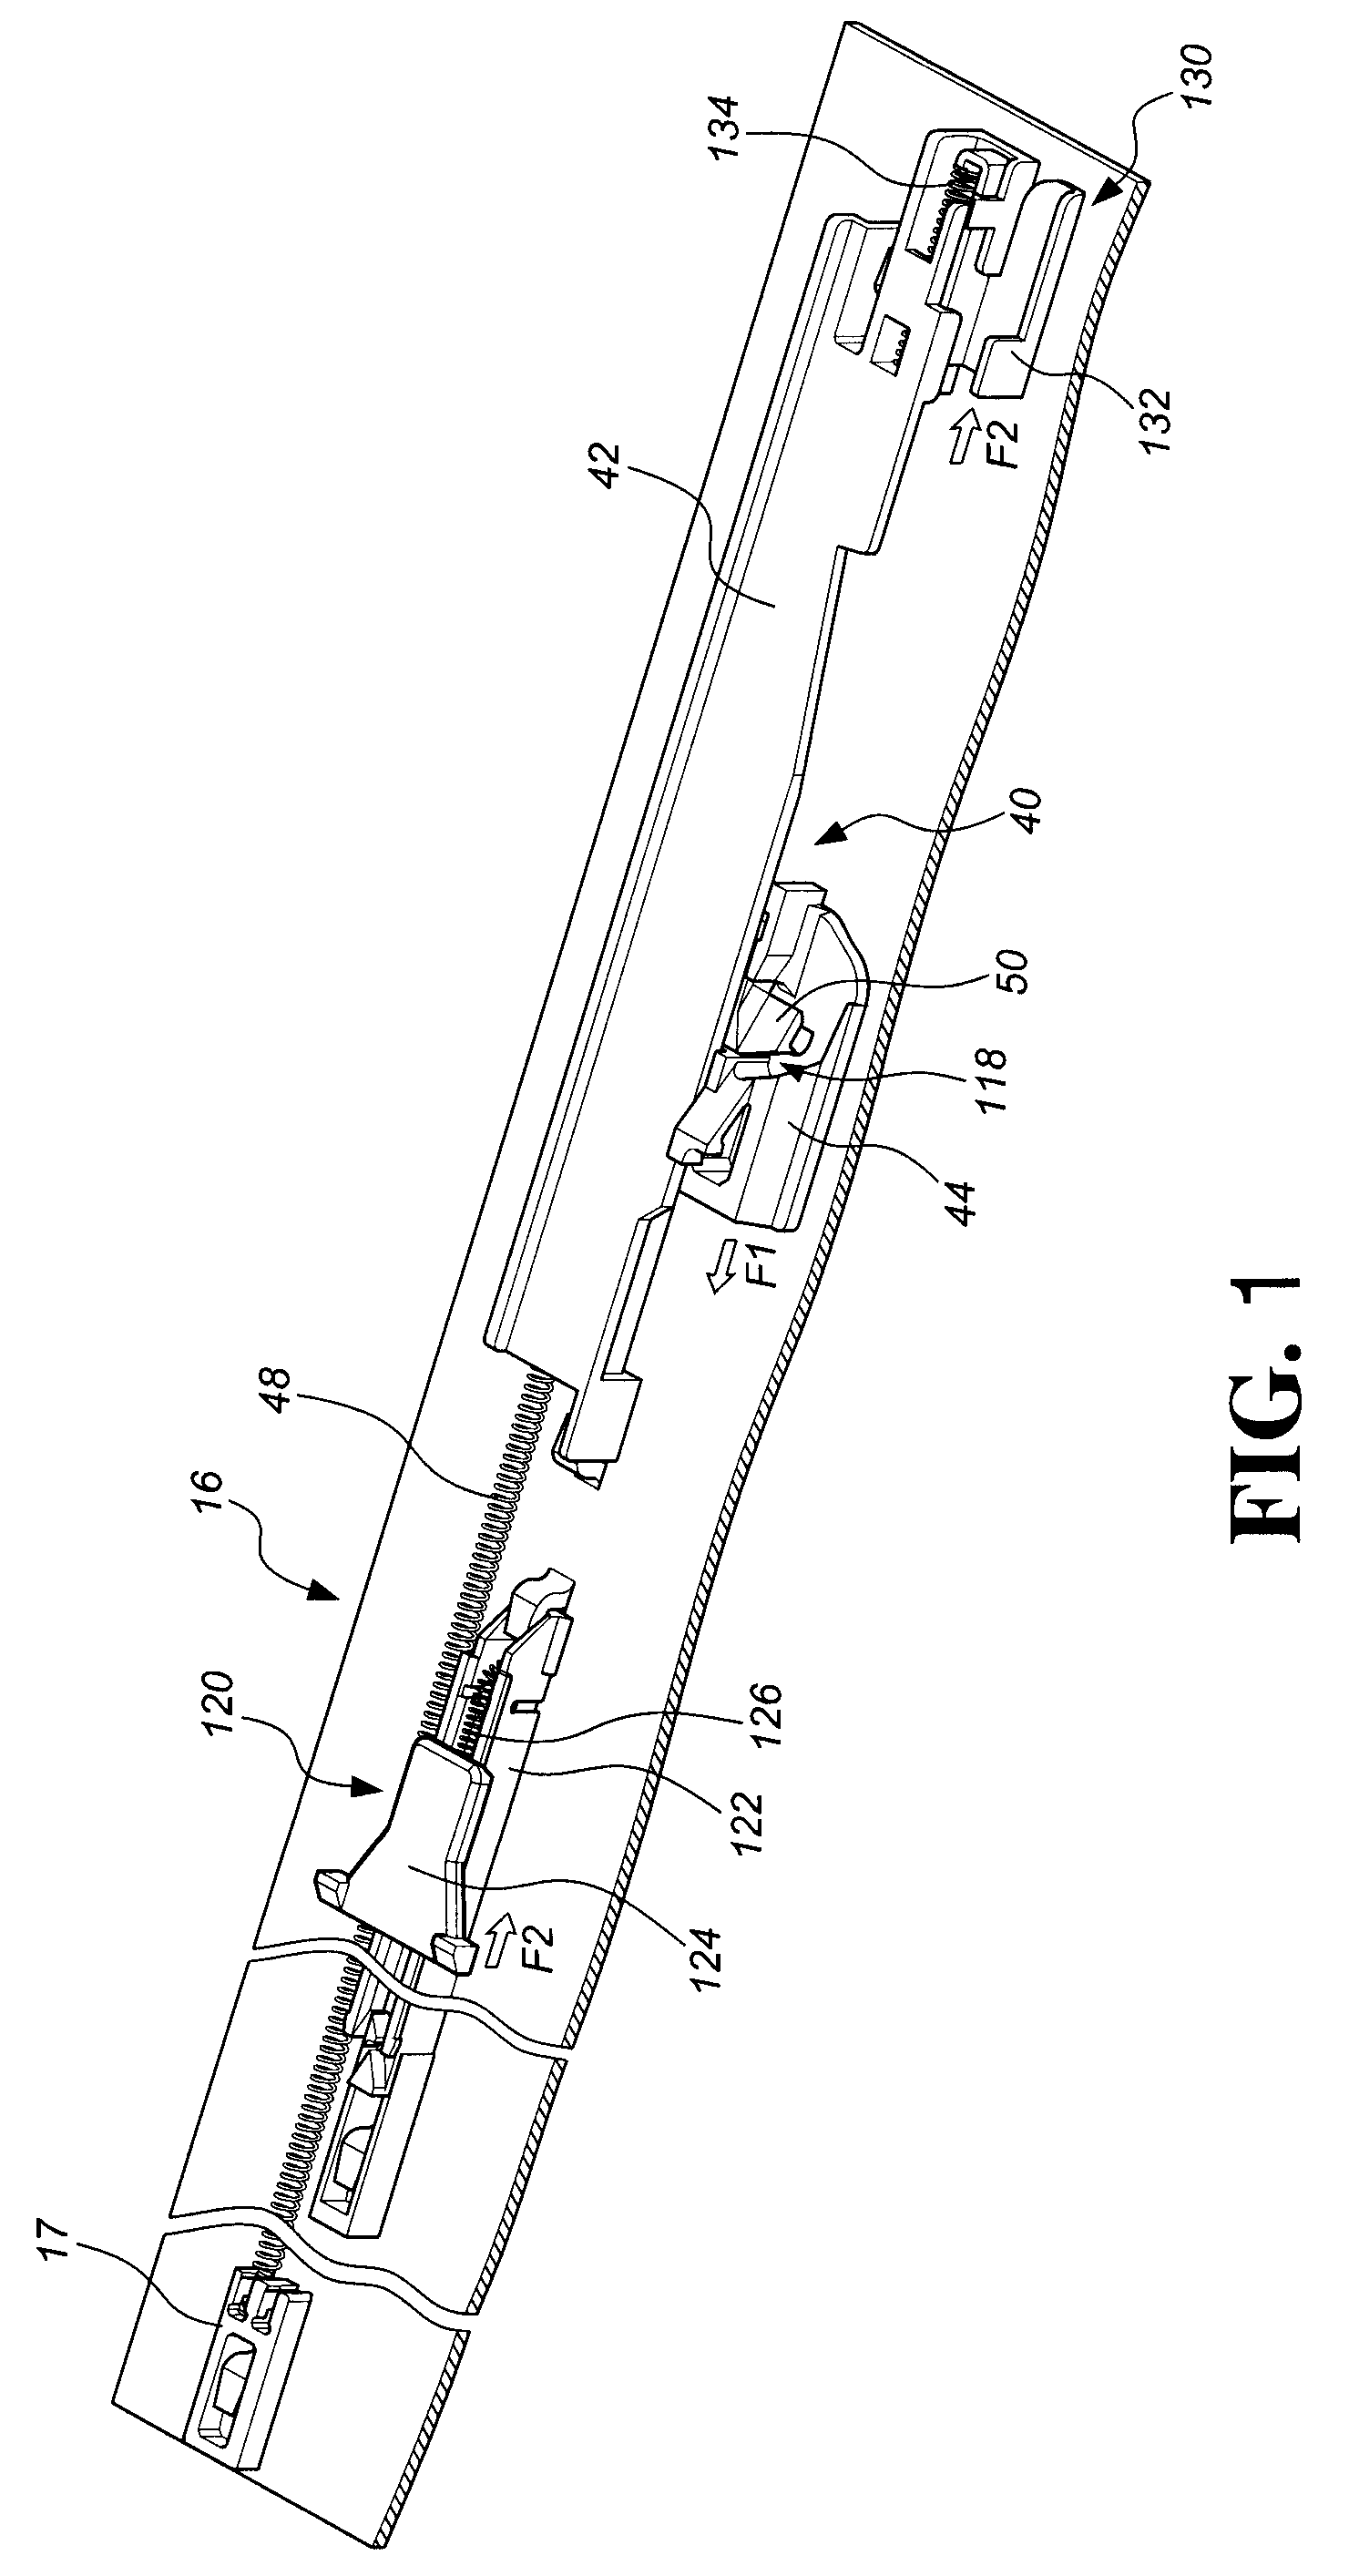 Self-moving device for movable furniture parts